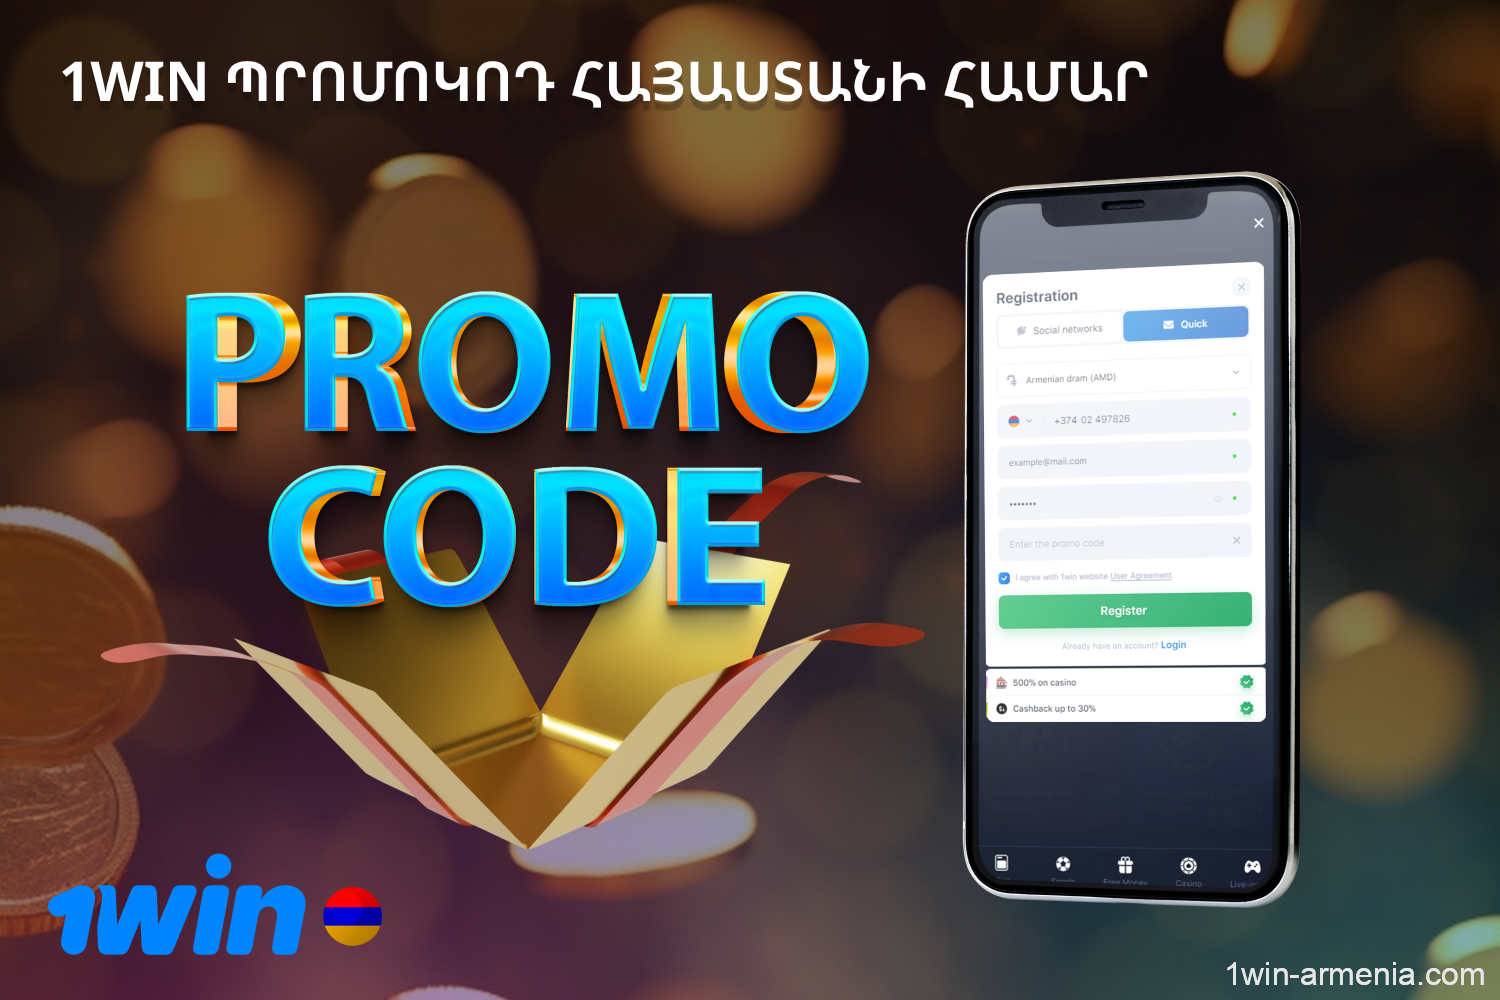 Users in Armenia can use a special 1win promo code that will allow them to get an additional bonus